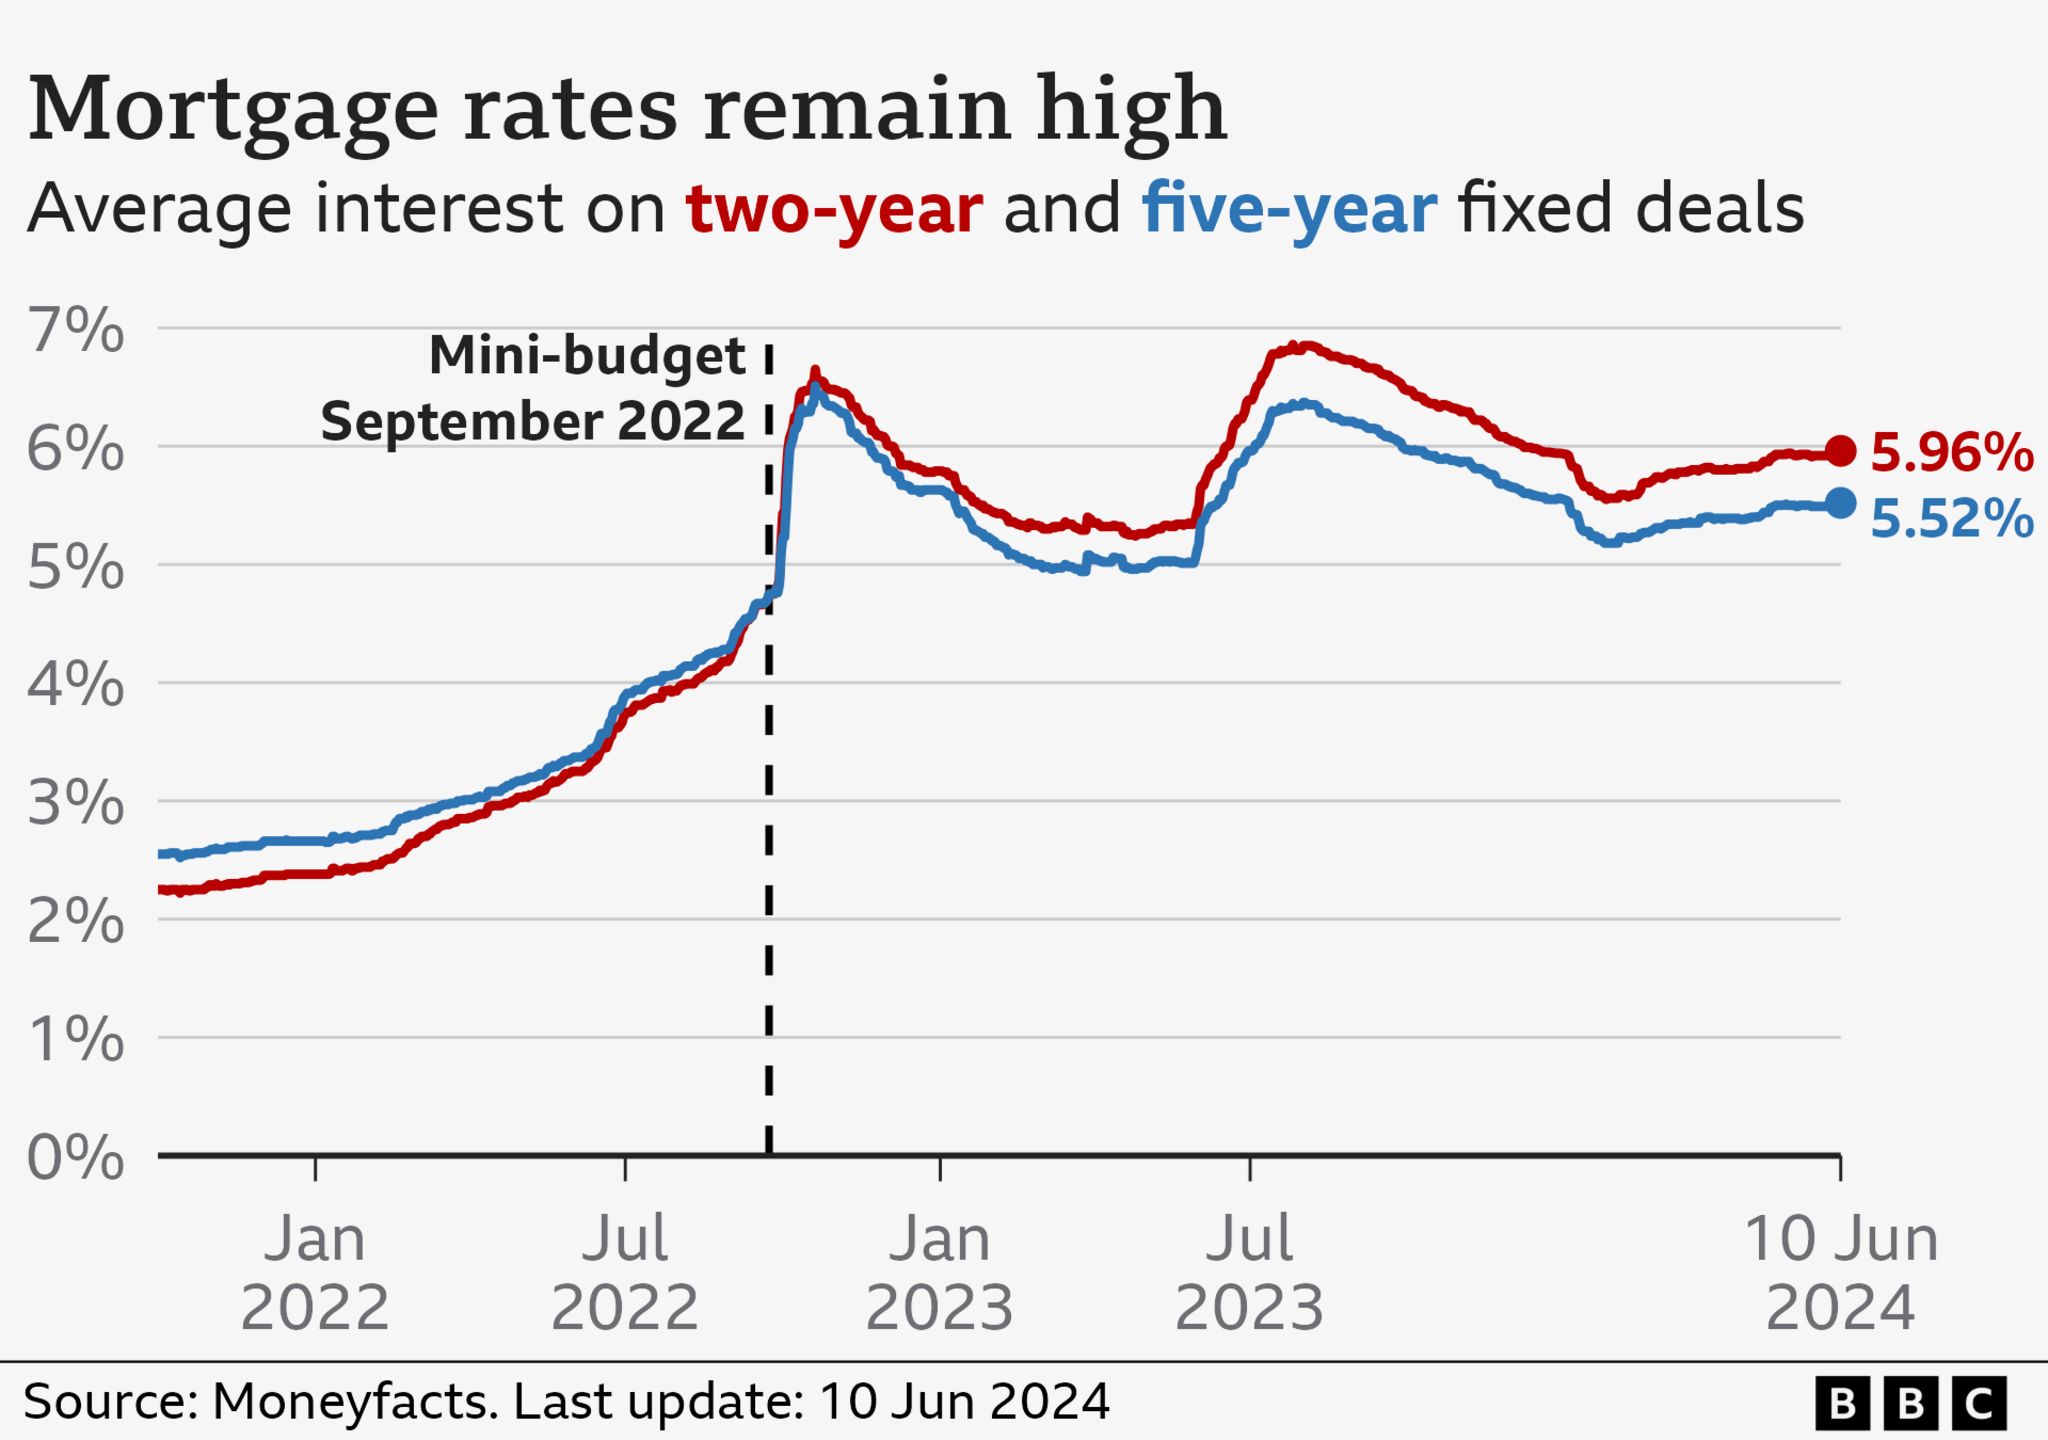 Line graph showing the average interest rate on two and five-year fixed rate mortgages, showing the jump in rates in September 2022 and how rates have been rising recently back towards 6%